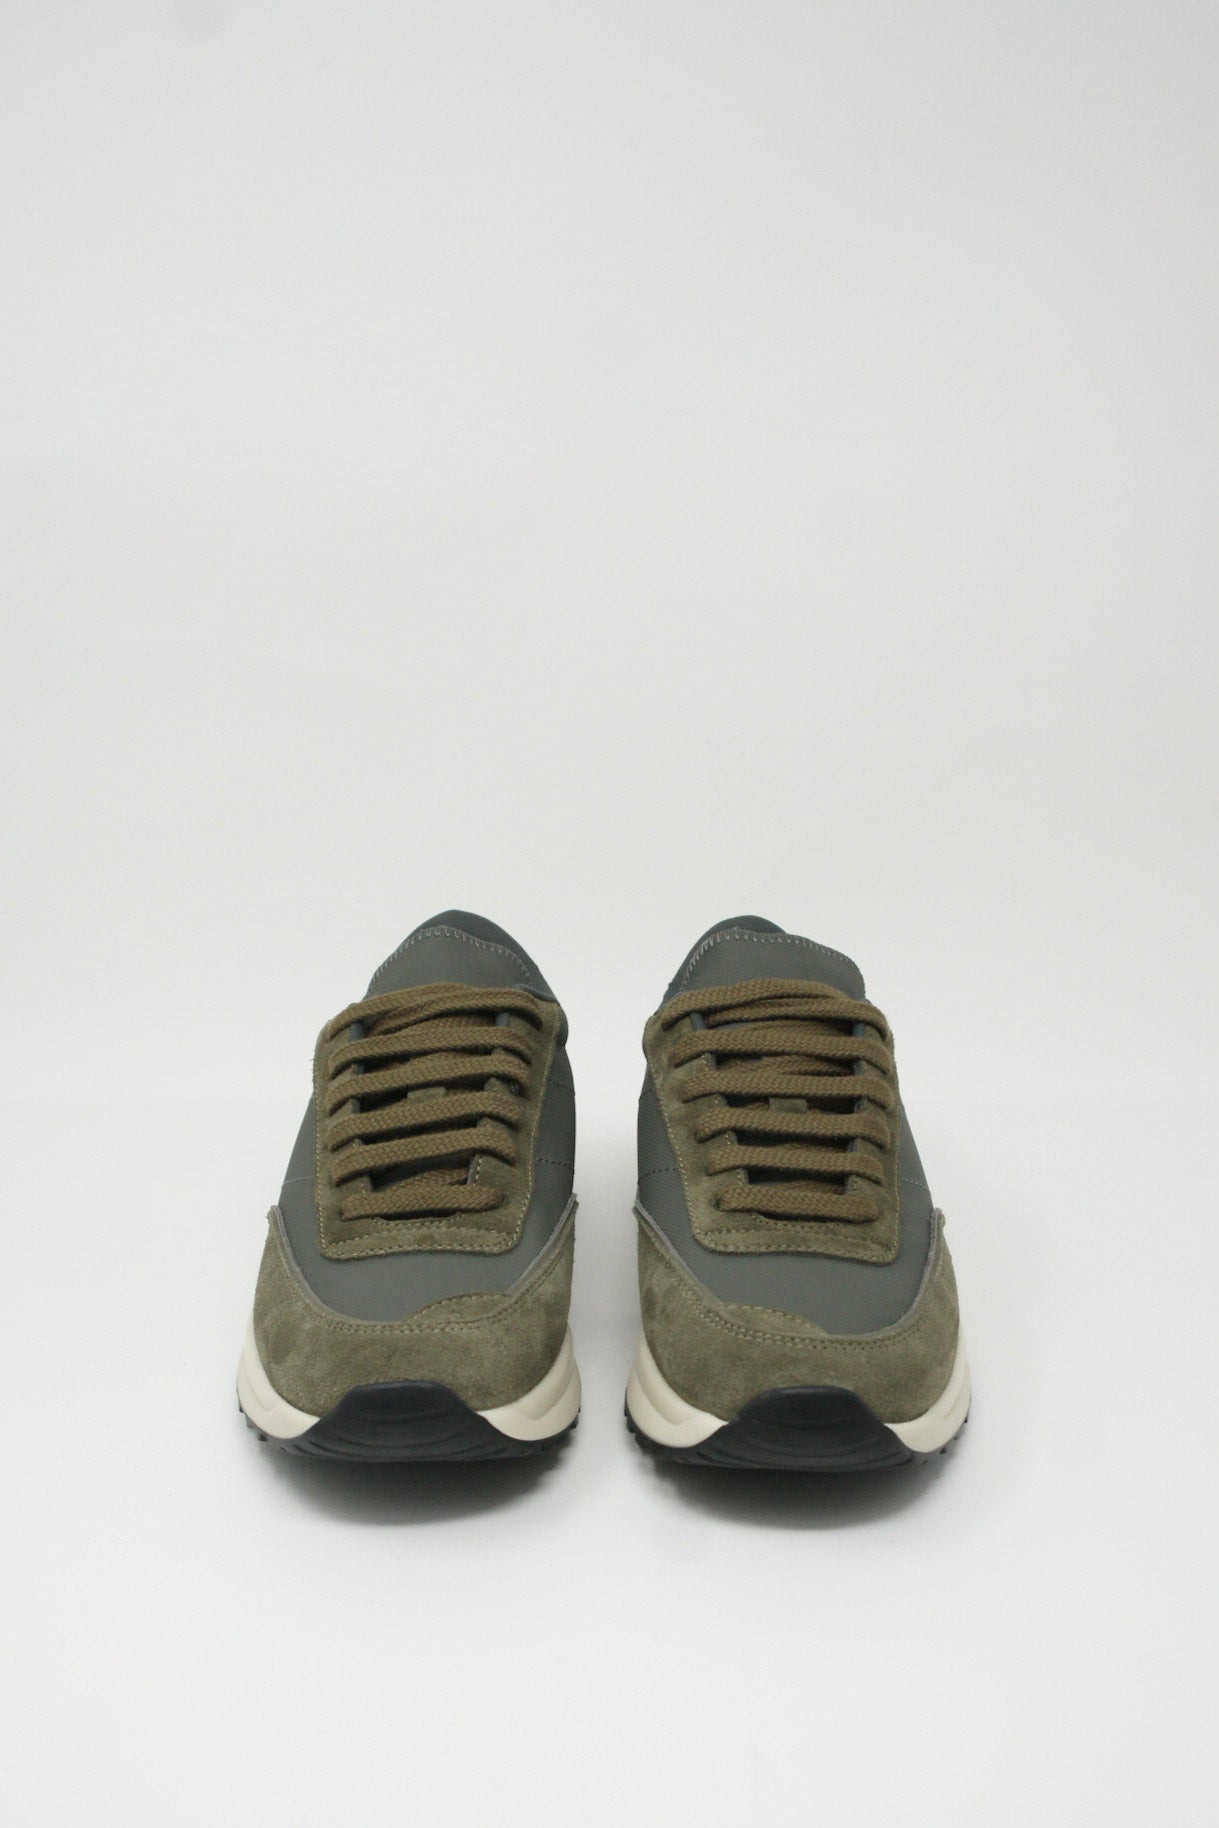 Track Technical Article Sneaker 6140 in Olive